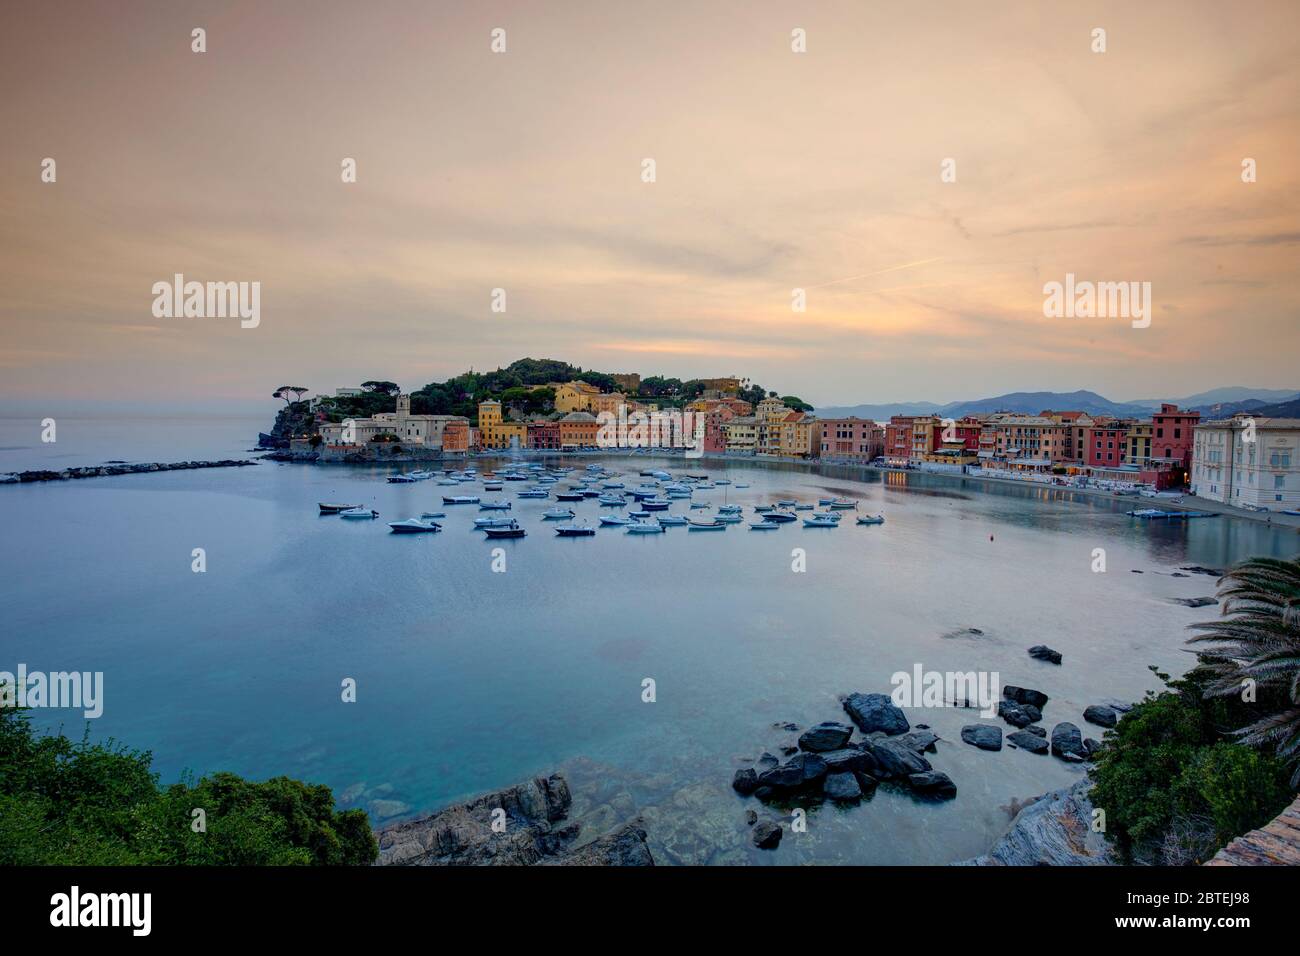 Silent bay at sunset, Sestri Levante, Italy Stock Photo